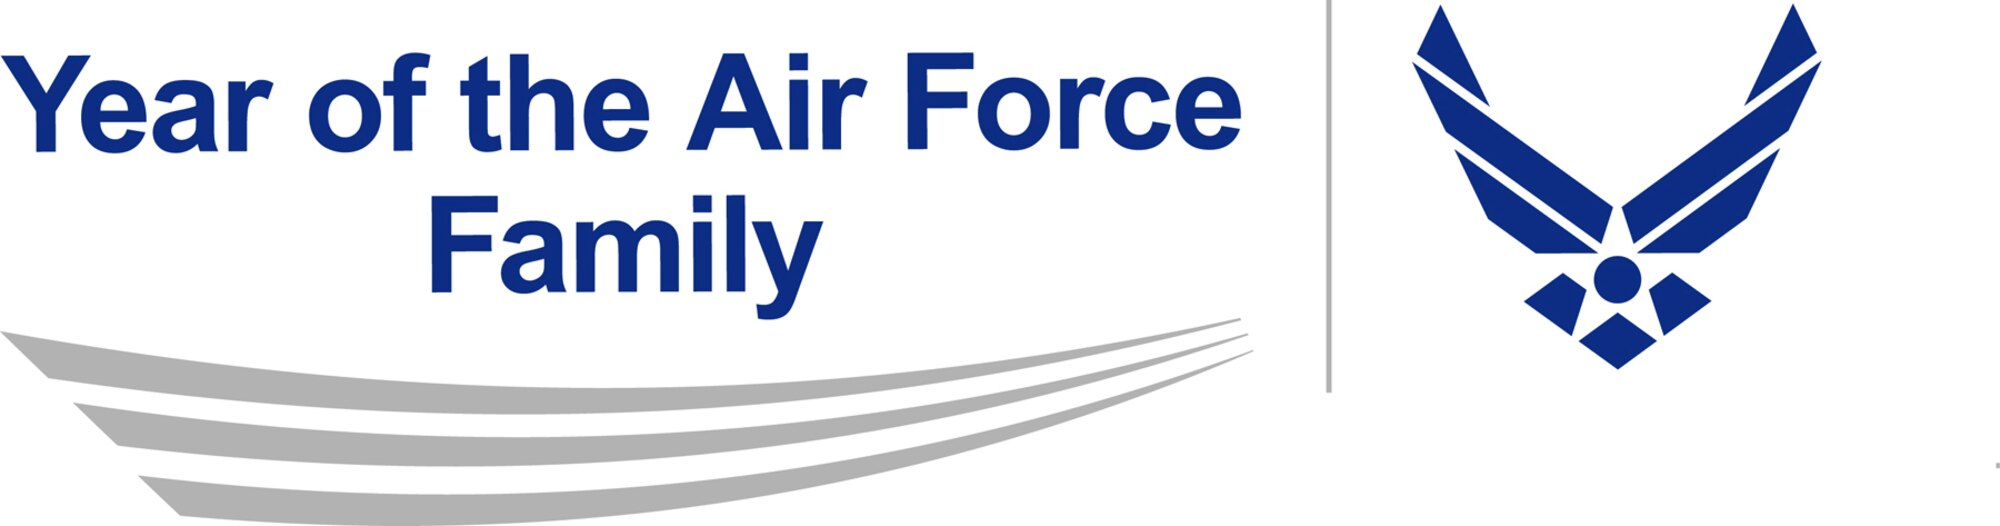 Year of the Air Force Family